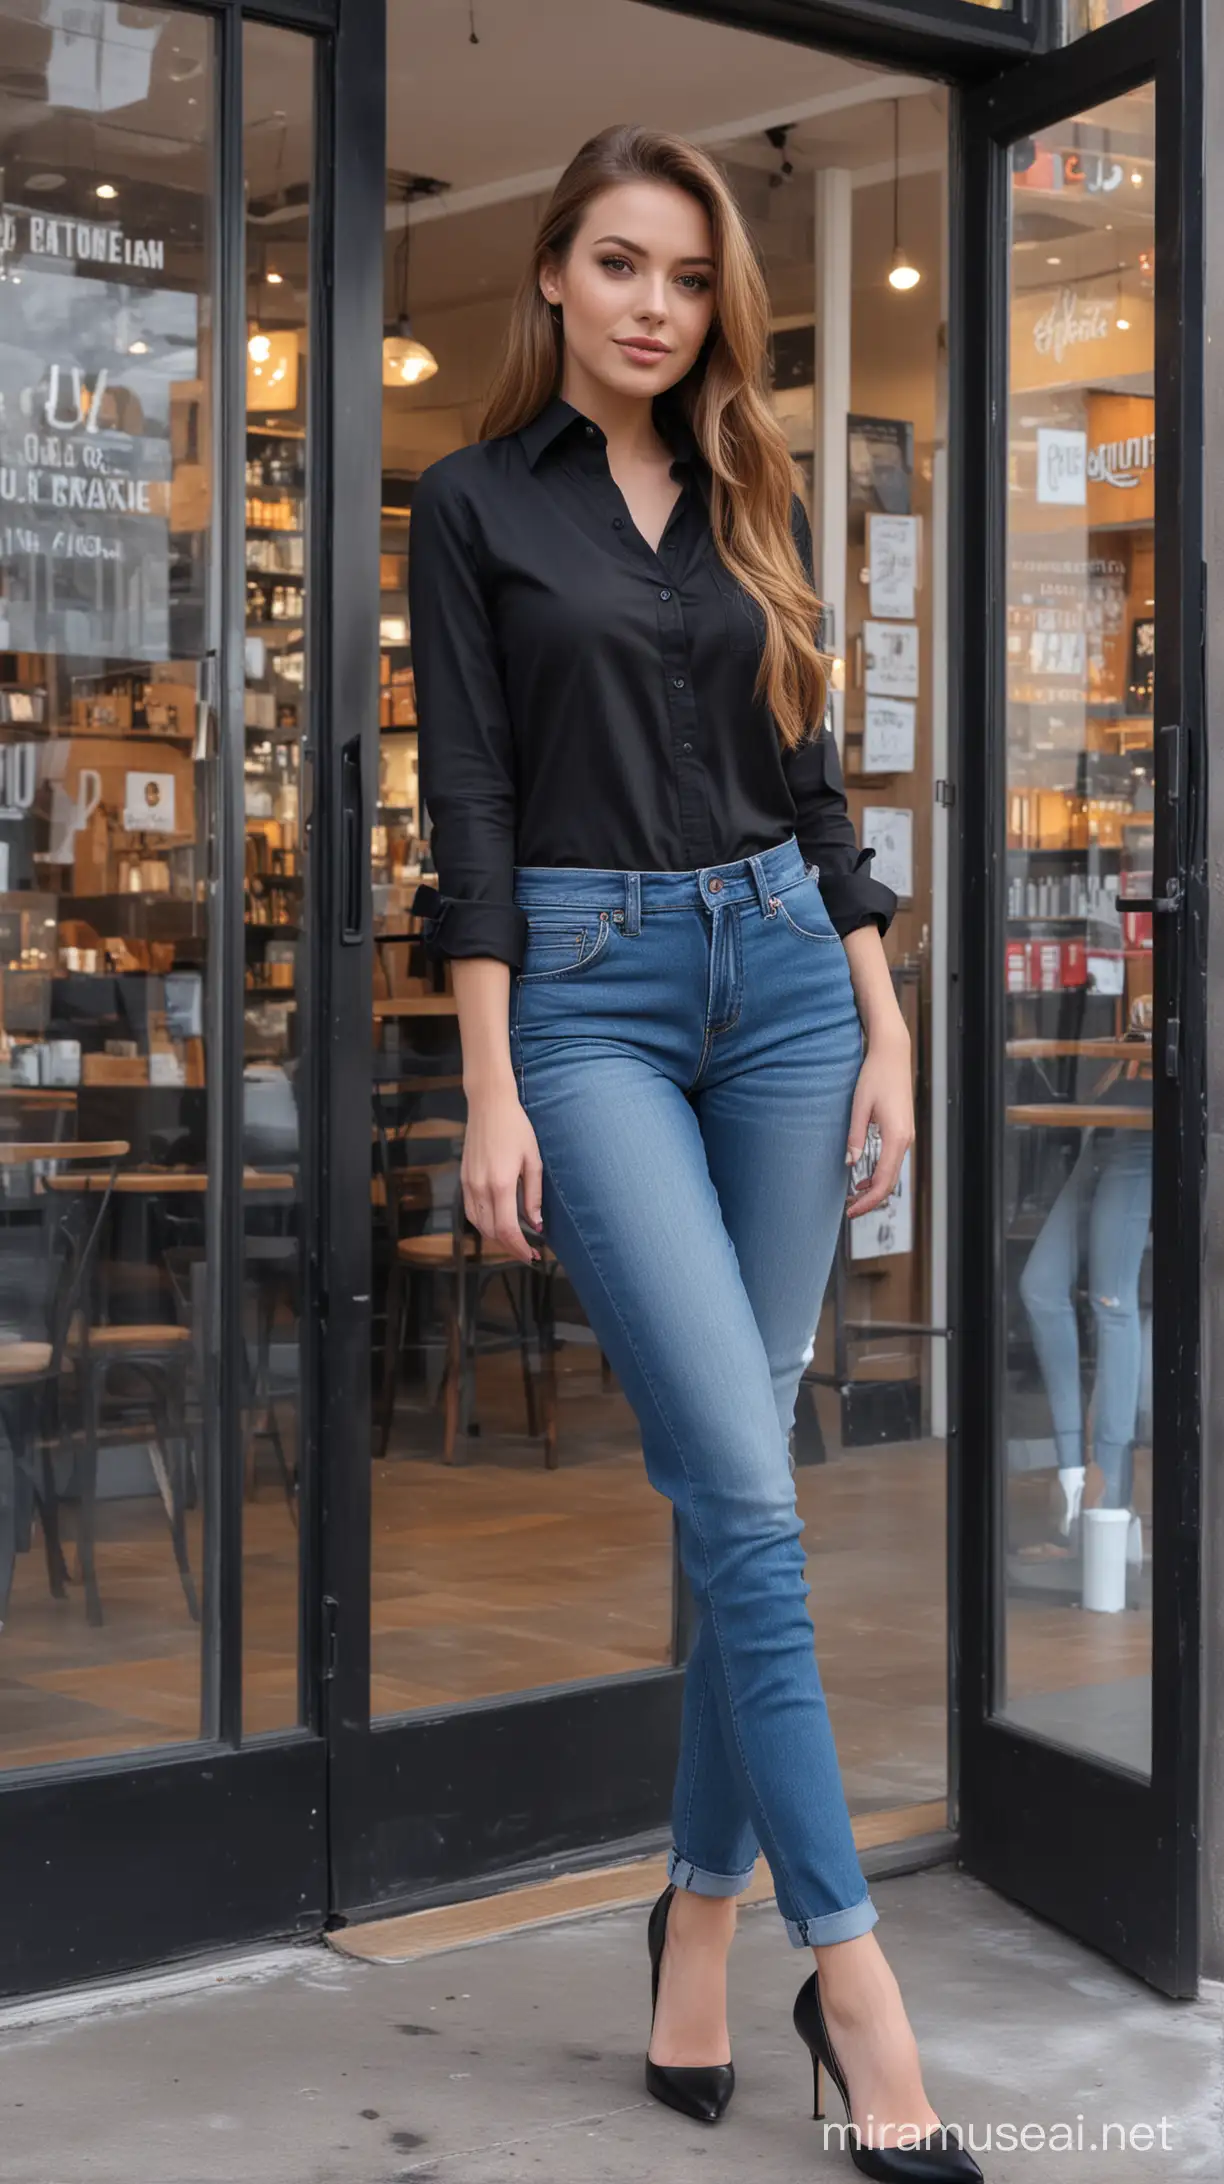 Stylish American Woman in Colorful Denim and Black Shirt at Urban Coffee Shop Entrance